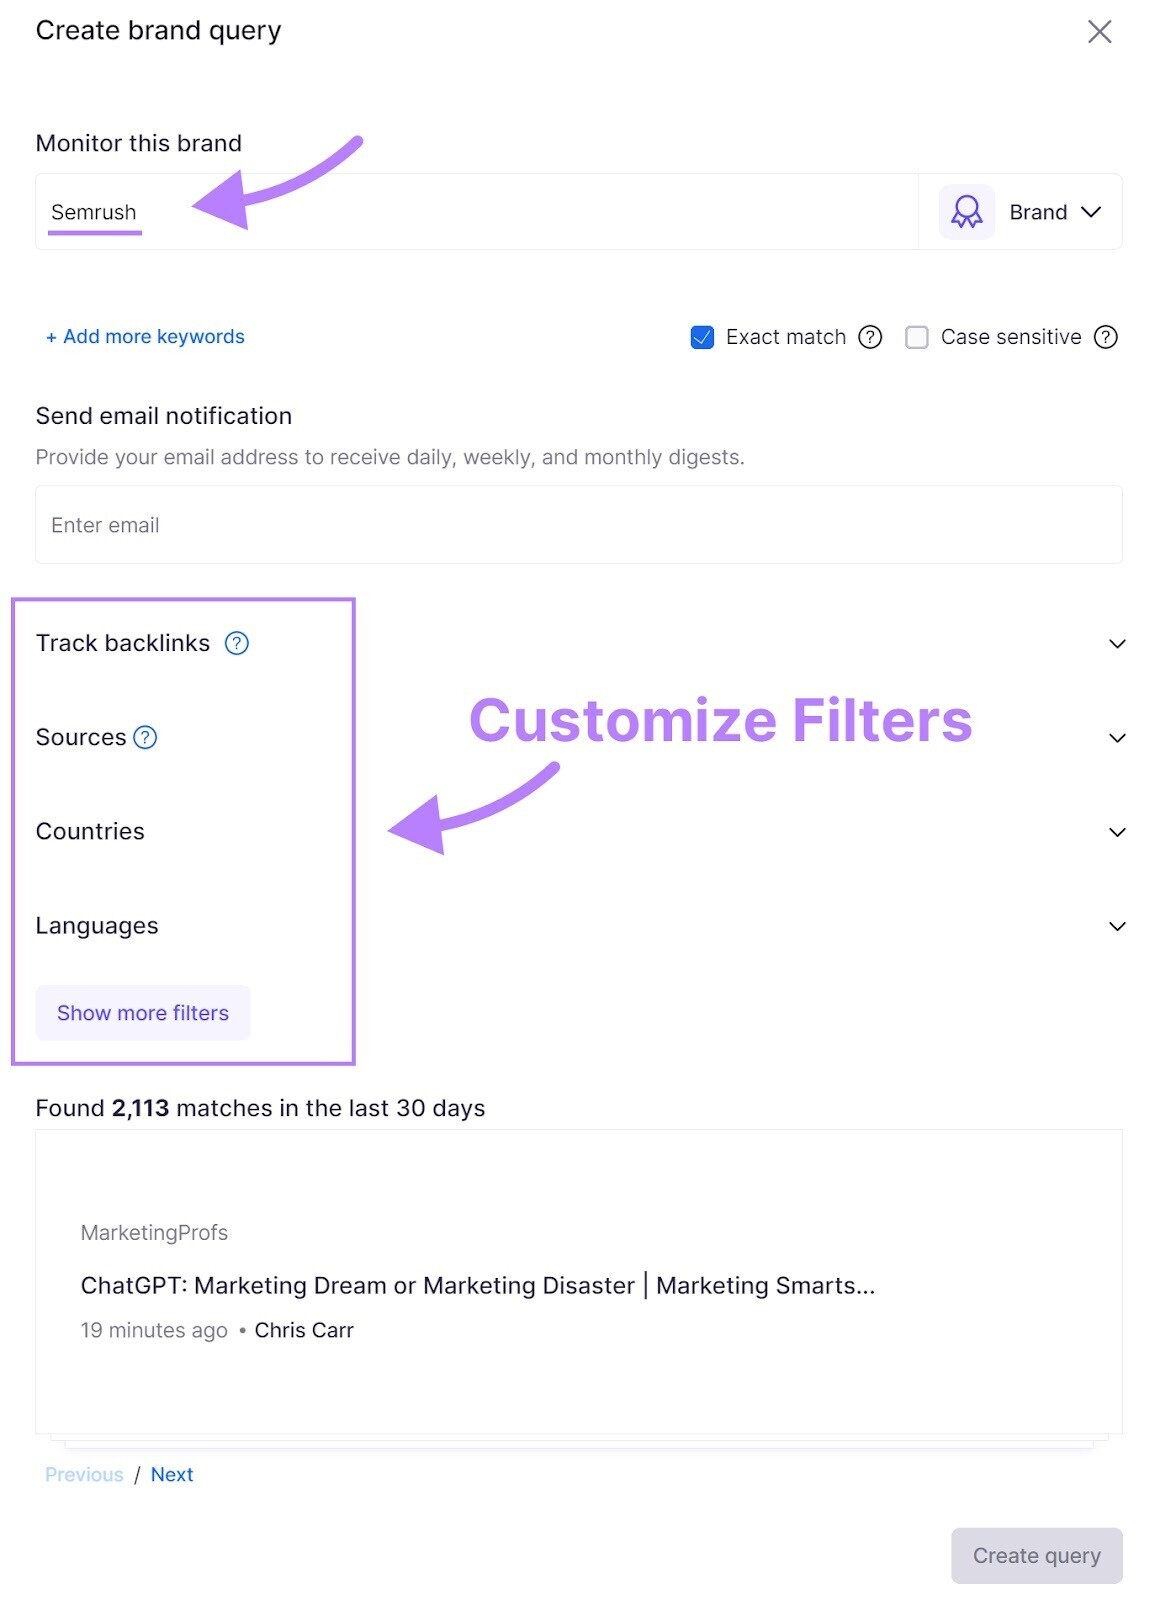 "Create brand query" window in Brand Monitoring app